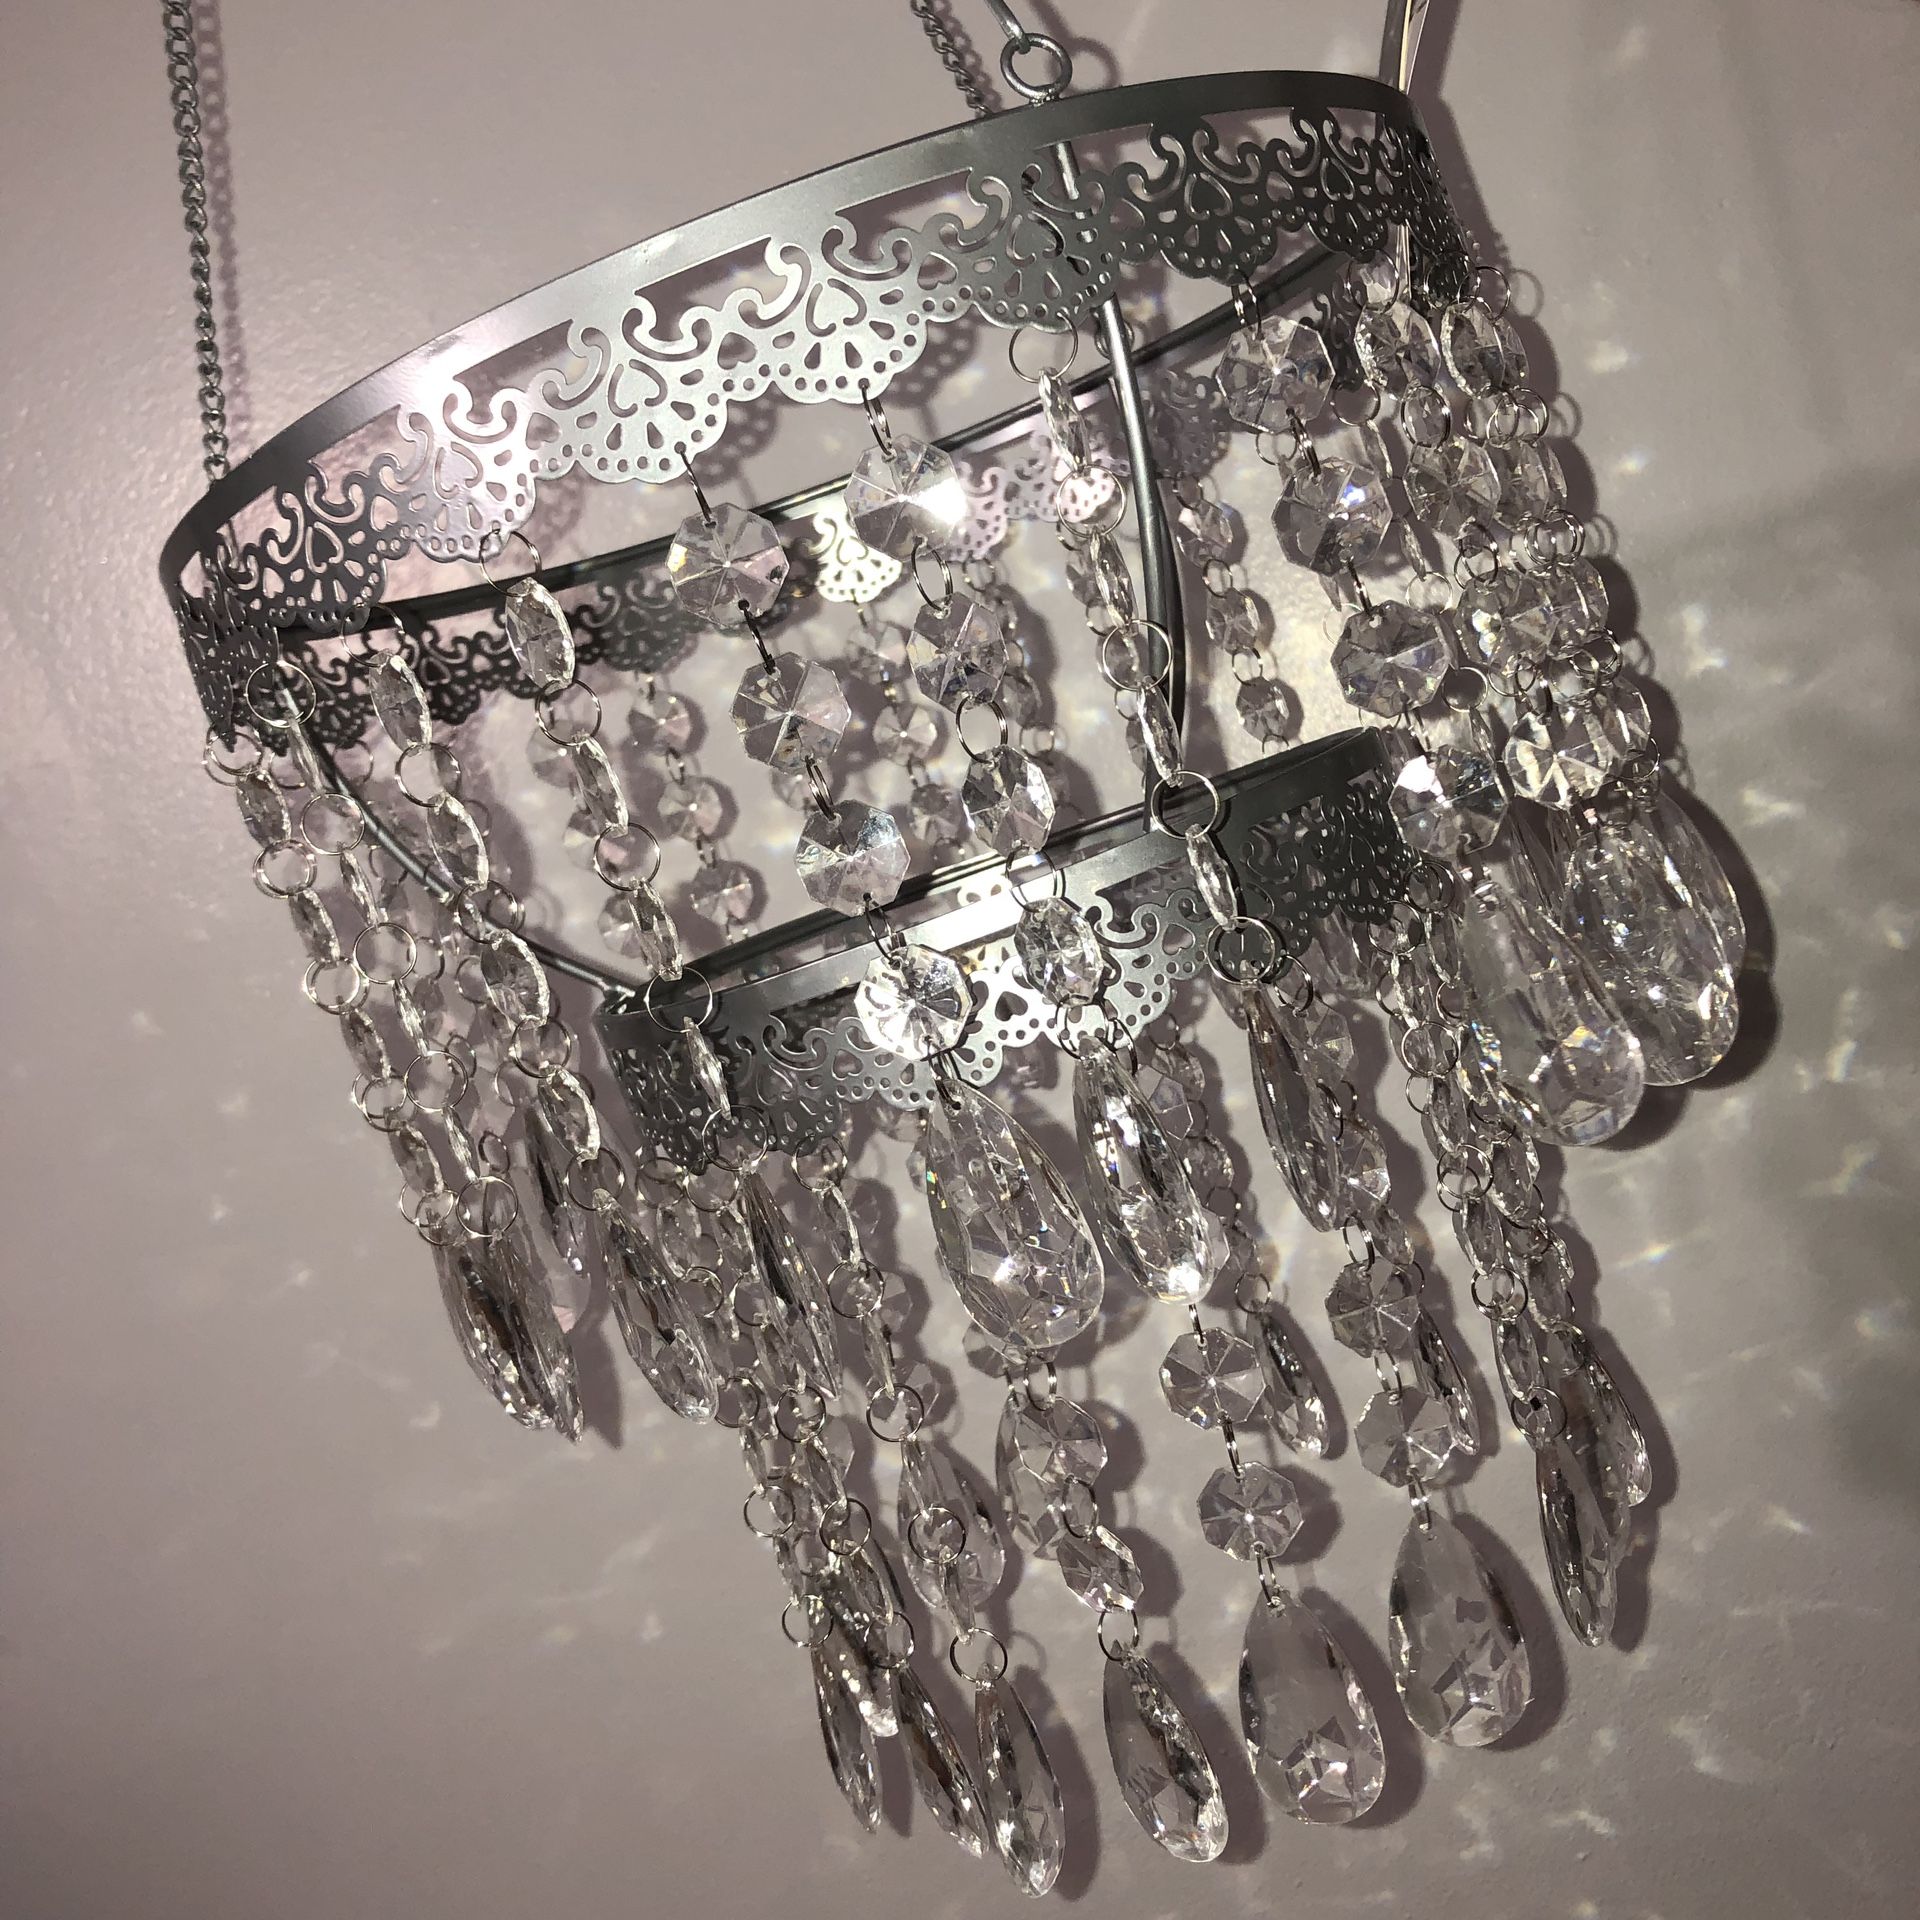 New silver crystal chandelier decor